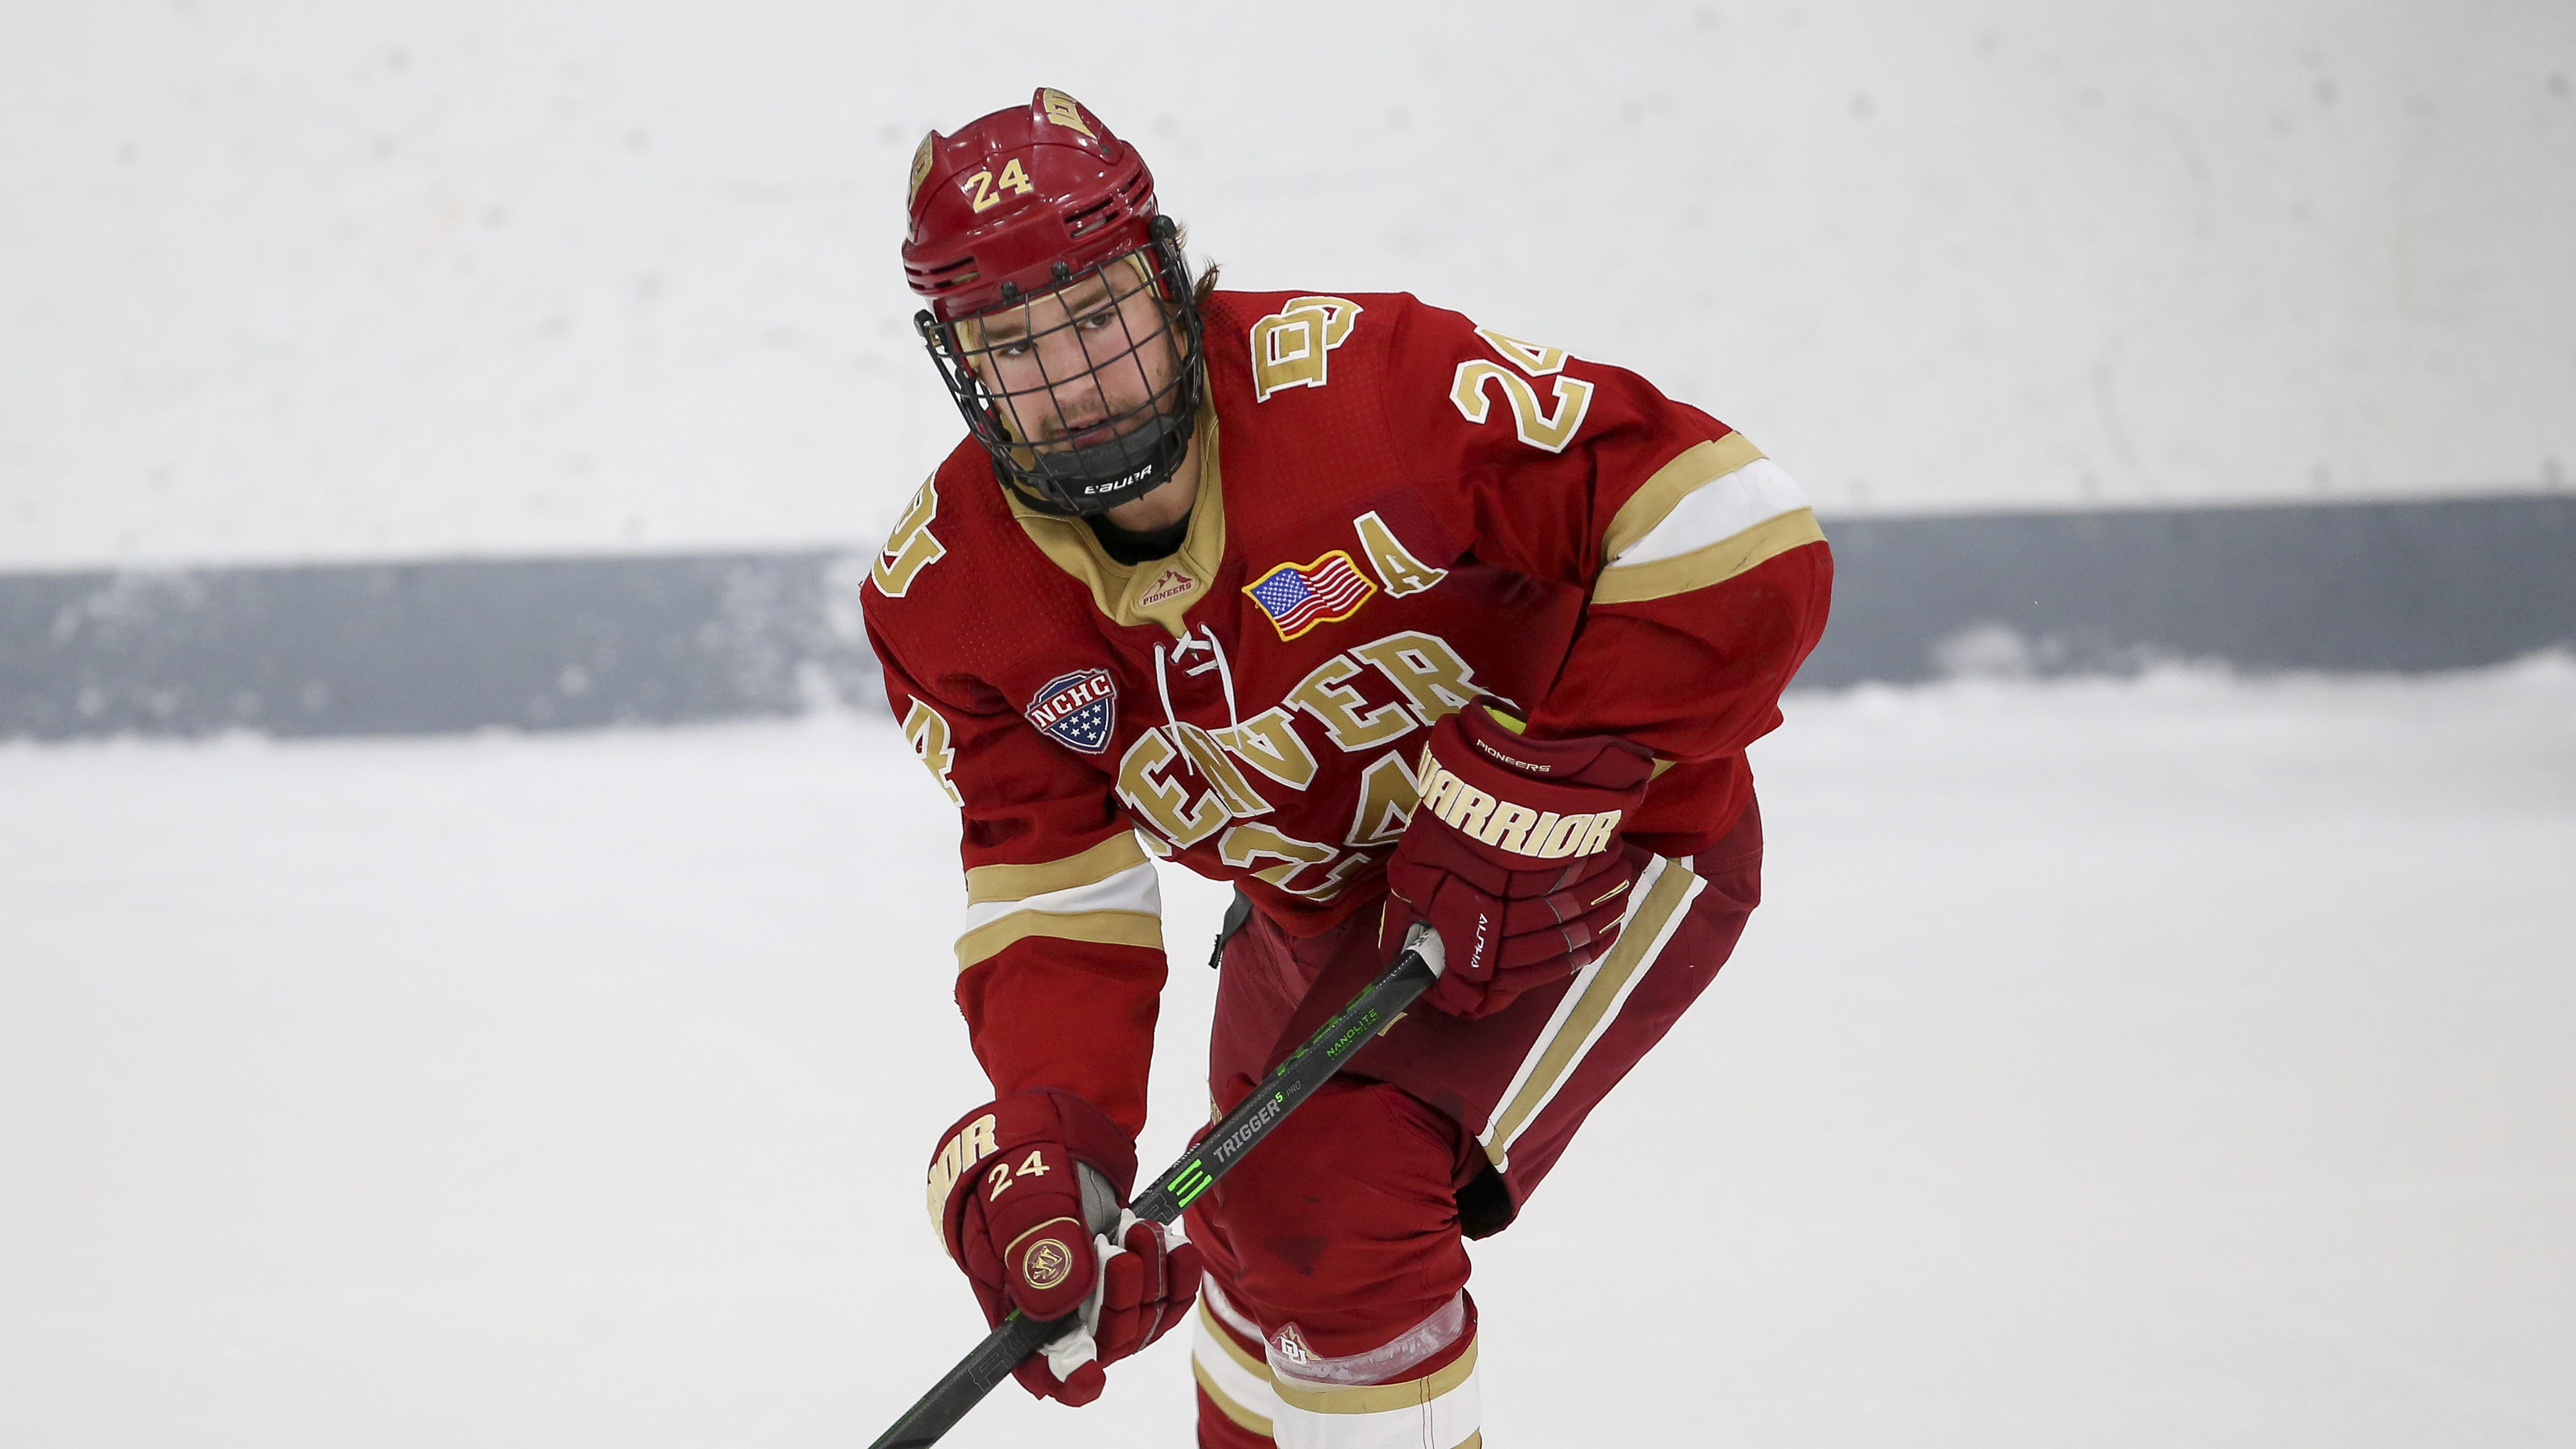 NHL prospects 2022: Ranking the top 10 players in NCAA Frozen